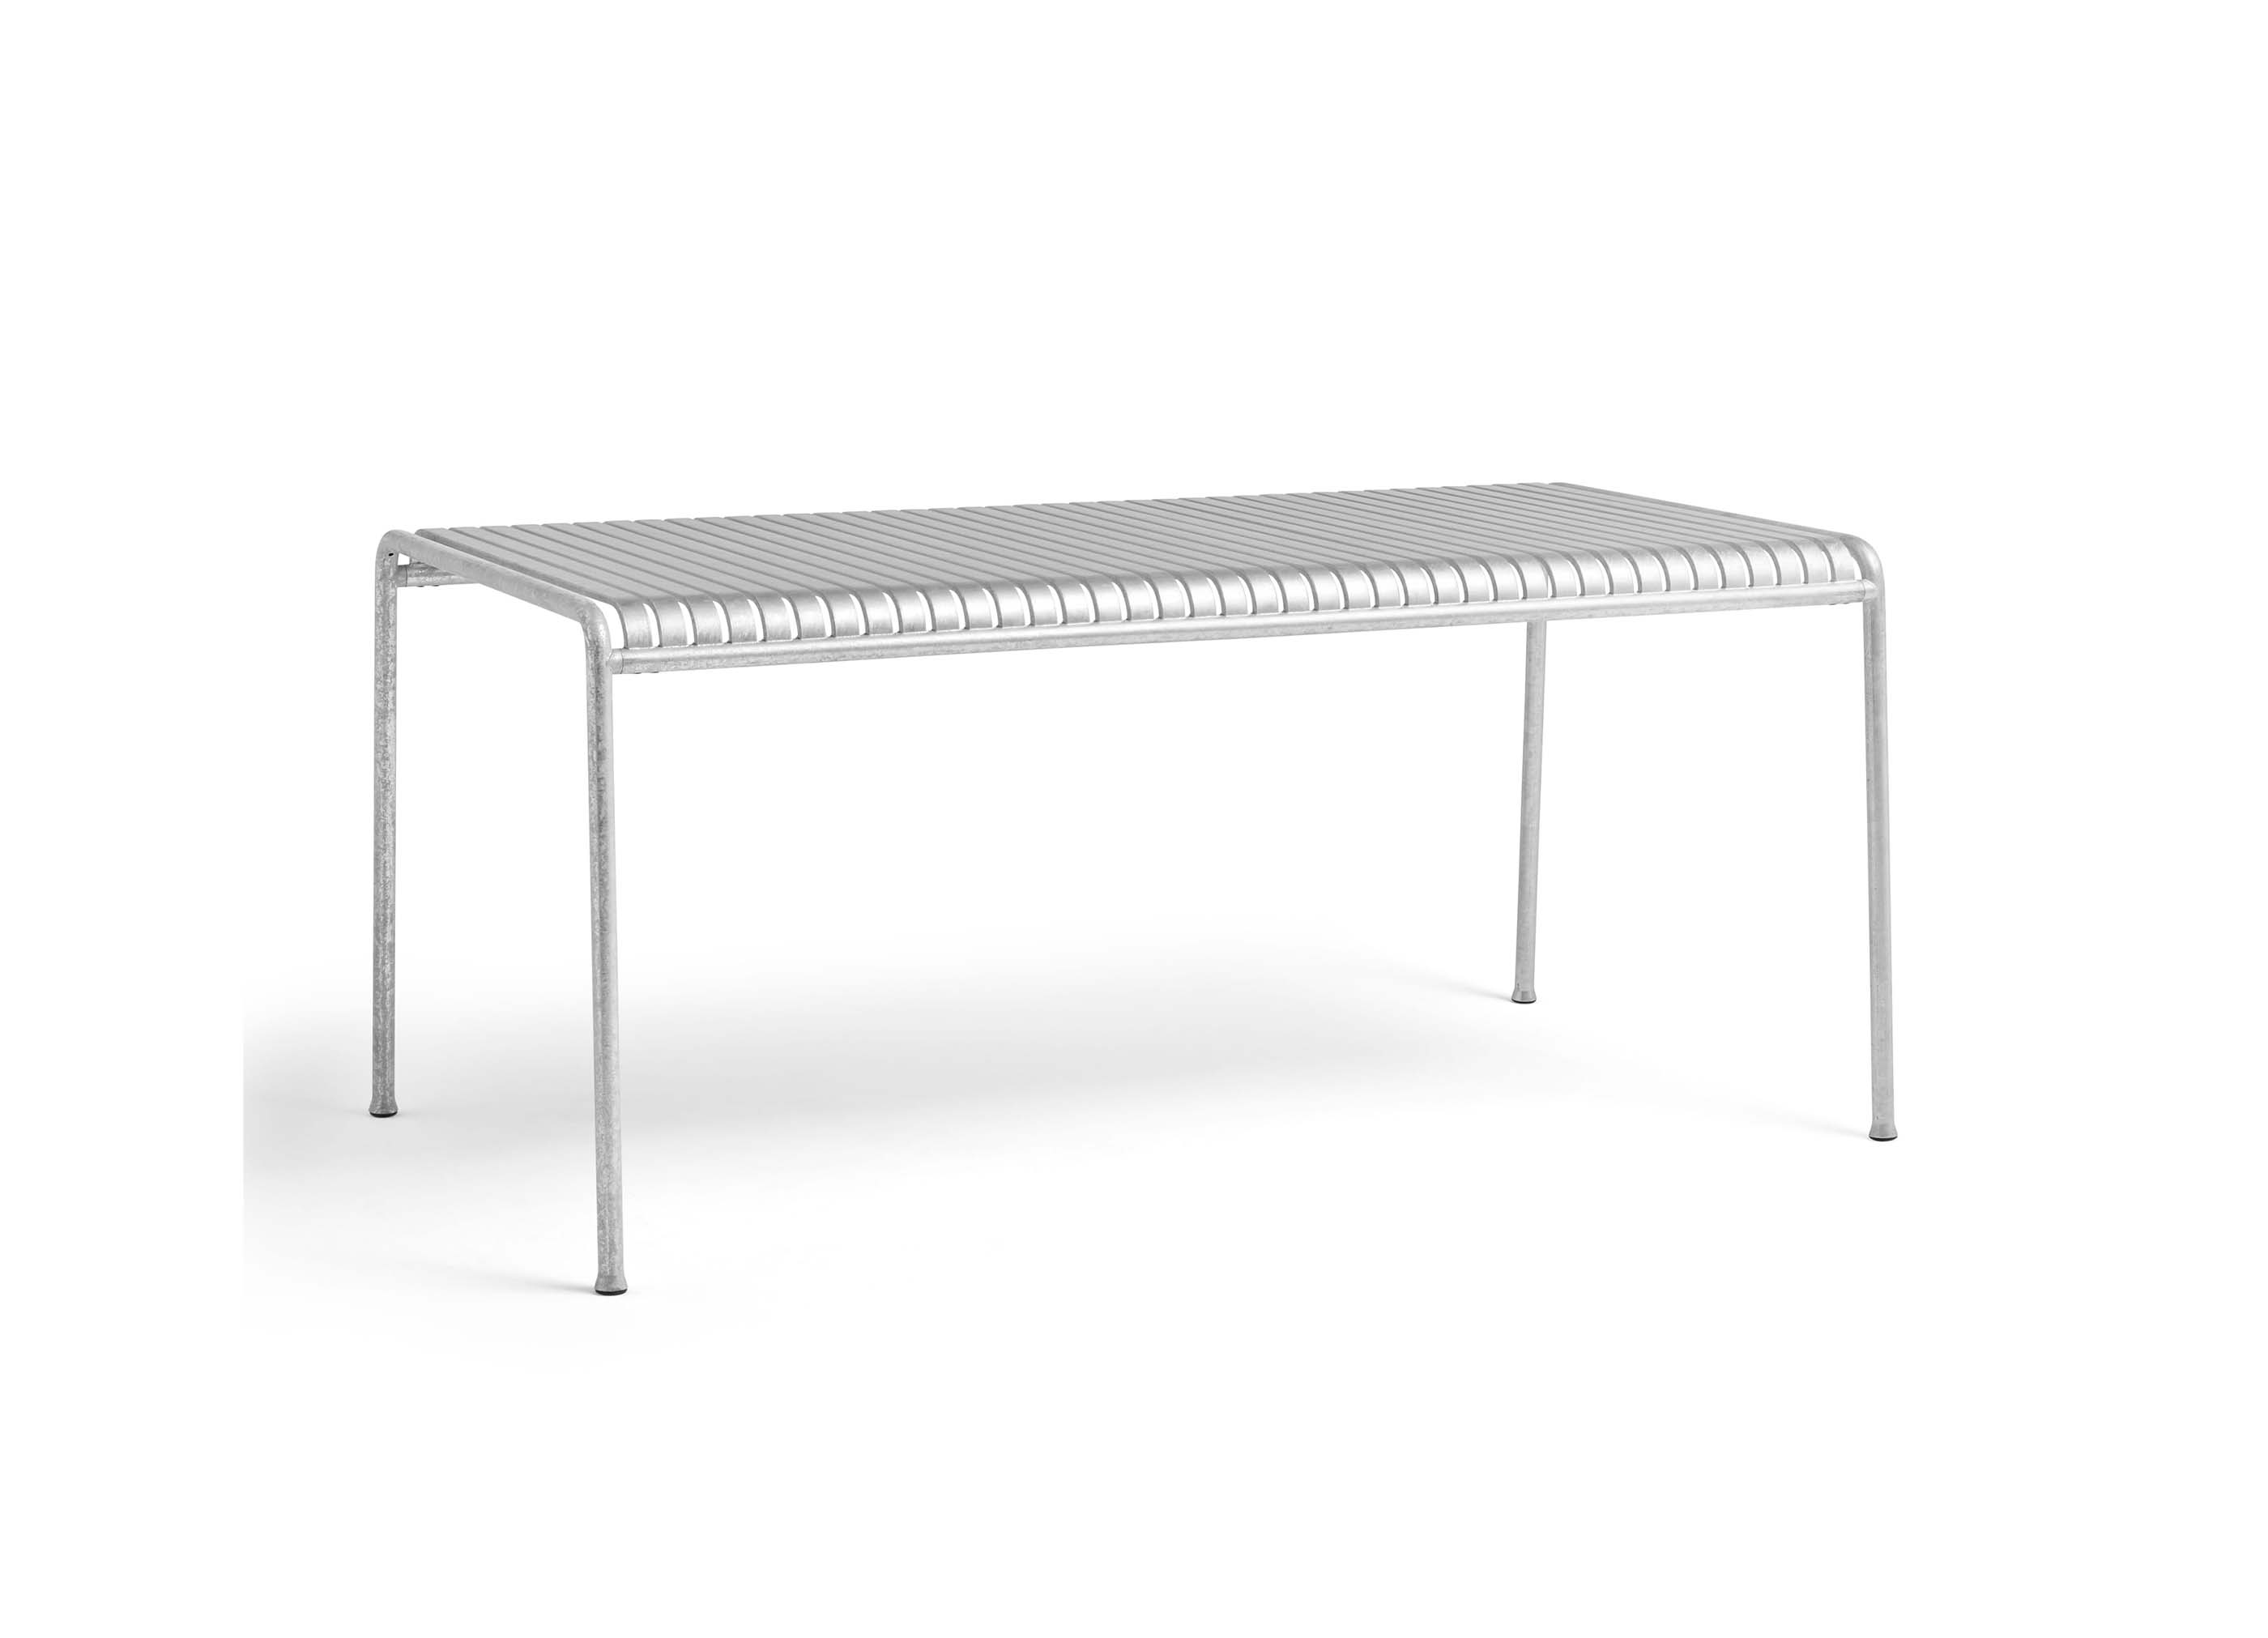 PALISSADE TABLE / L170 x W90 - HOT GALVANISED